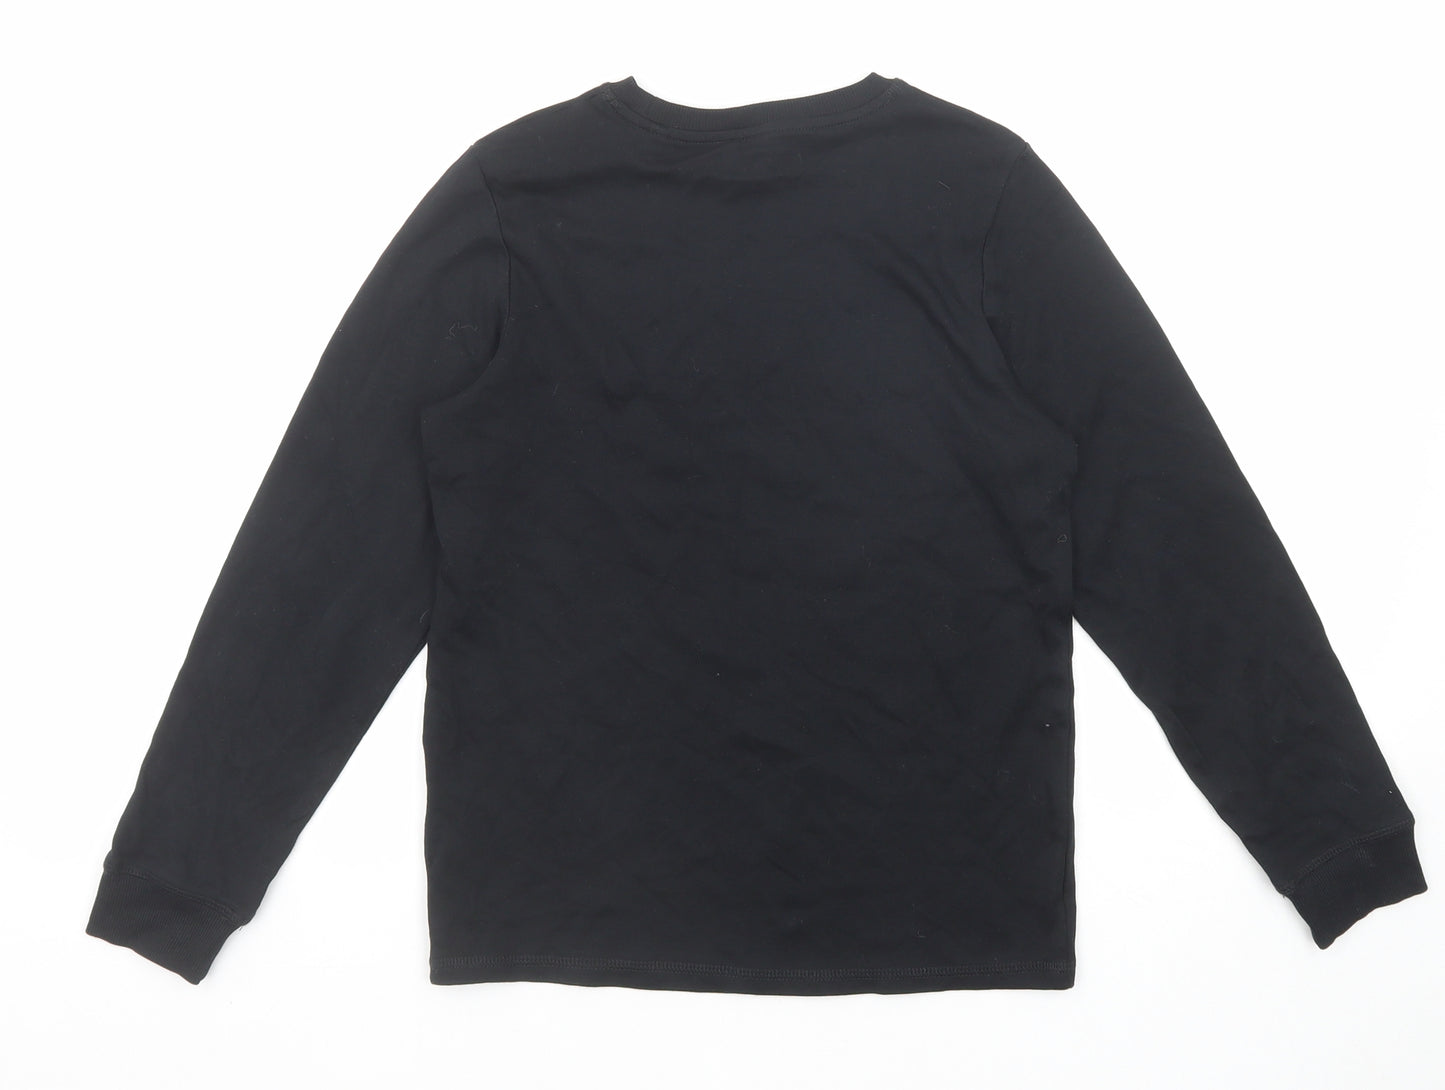 NEXT Girls Black Cotton Basic T-Shirt Size 11 Years Round Neck Pullover - #Up To Snow Good.